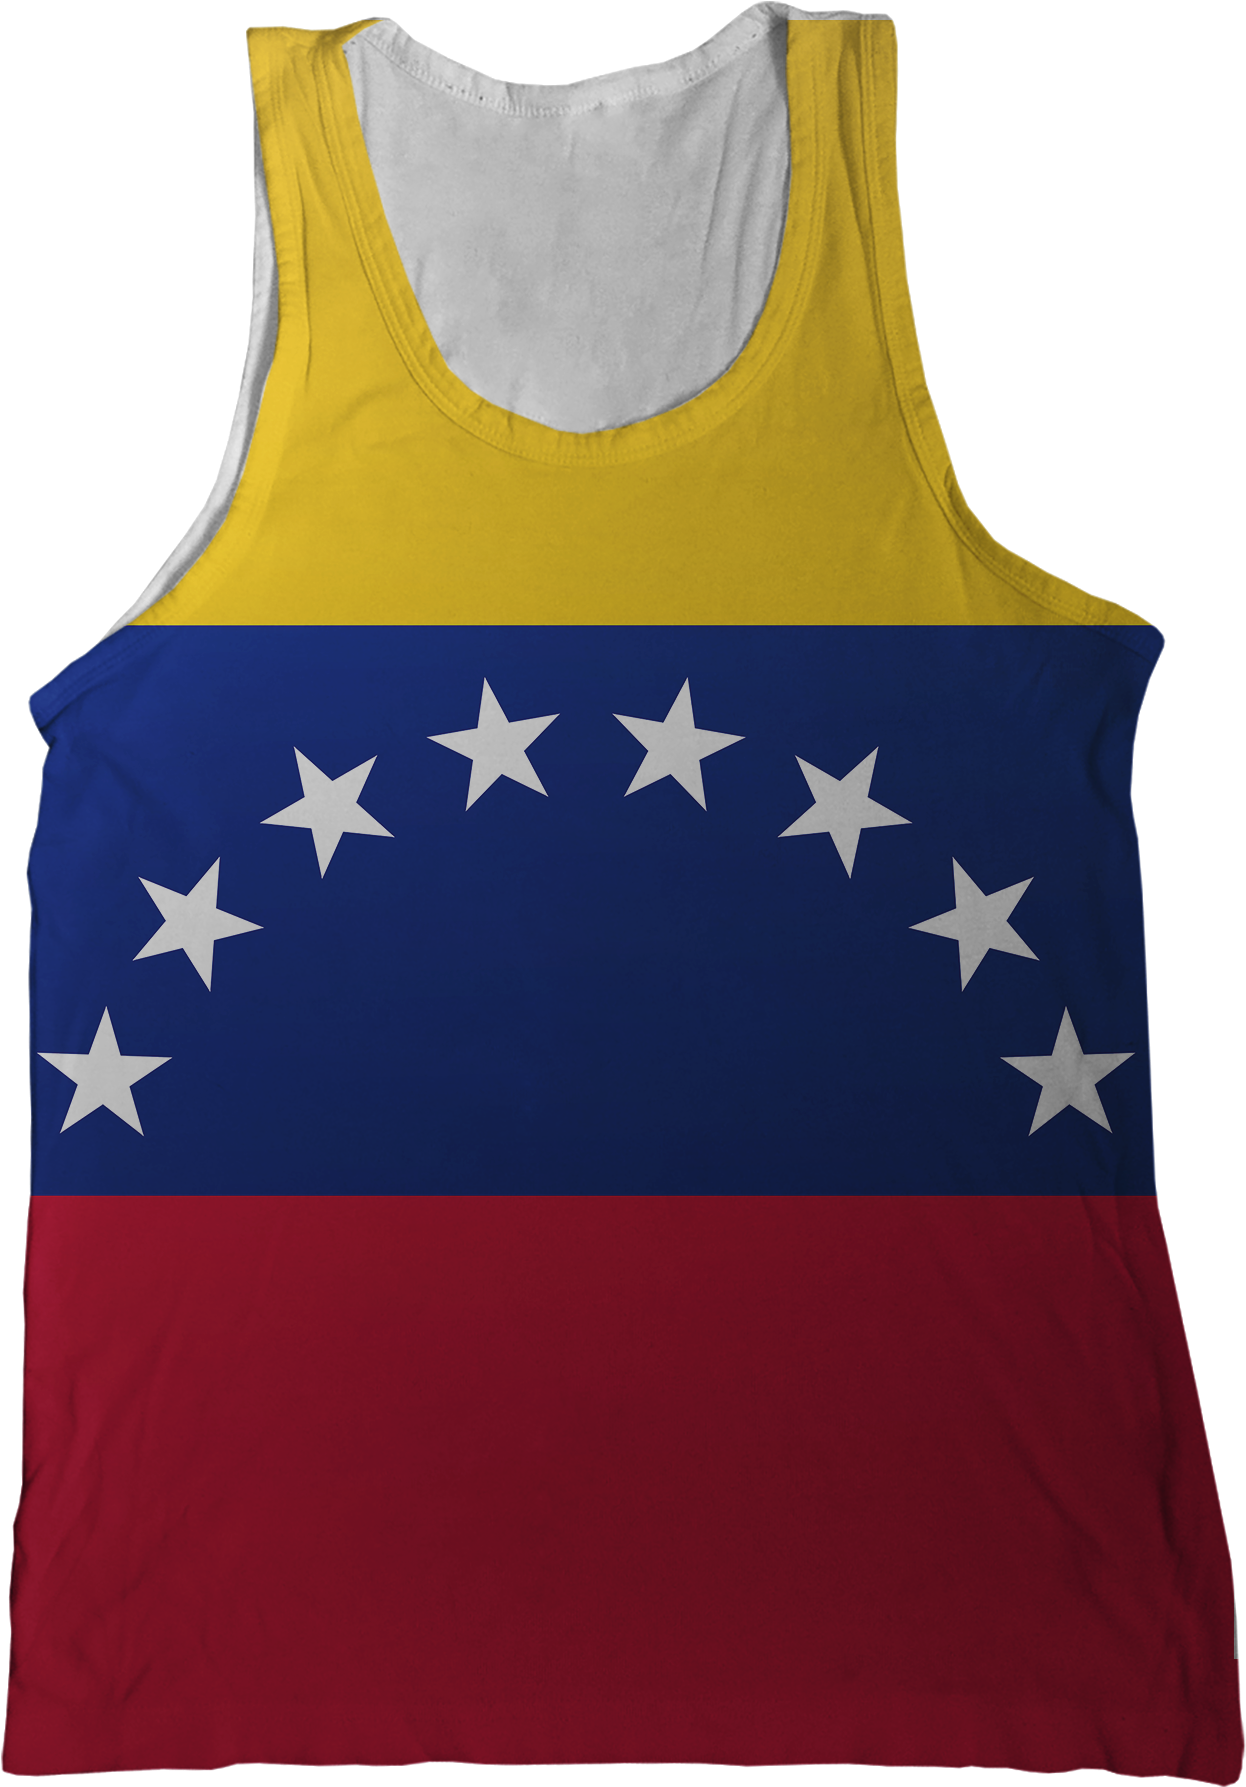 A Tank Top With A Flag Design